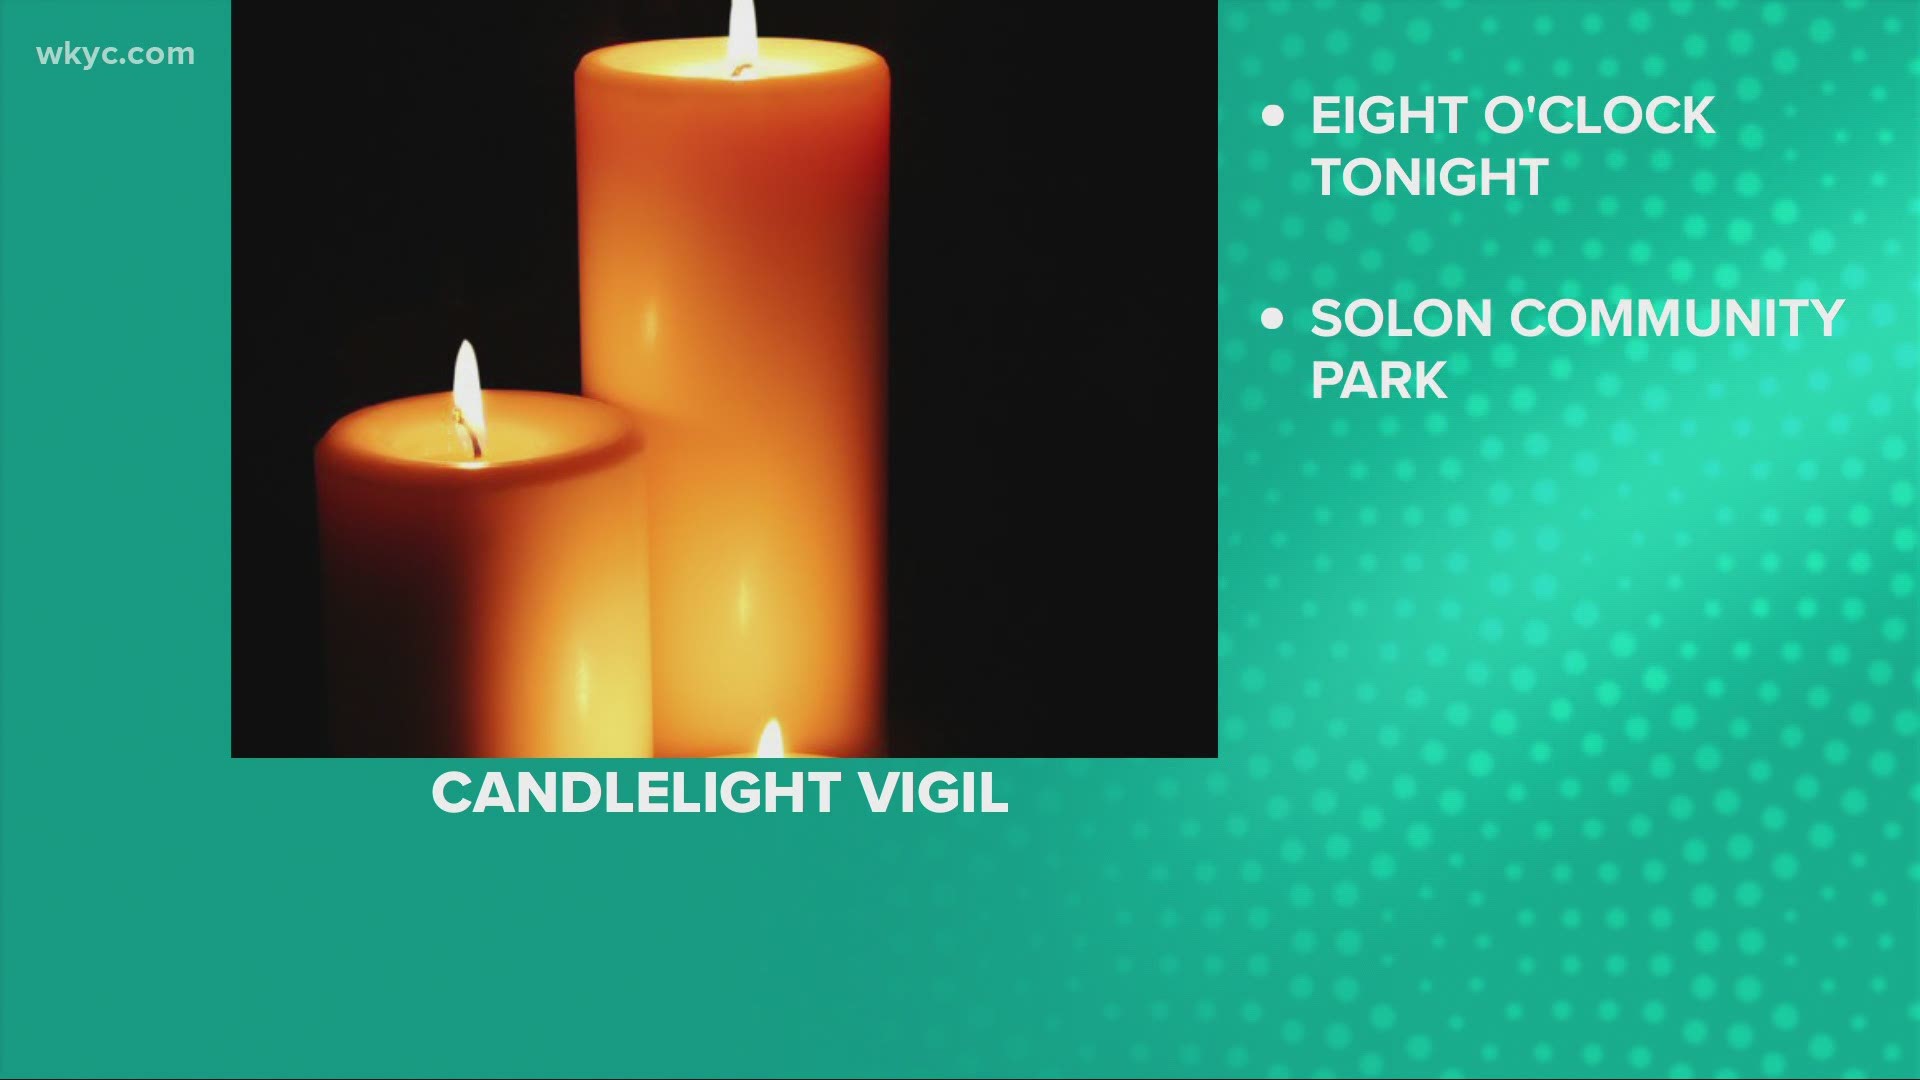 The candlelight vigil will be held from 8-9 p.m. on Saturday. Community members are encouraged to come out and show their support.